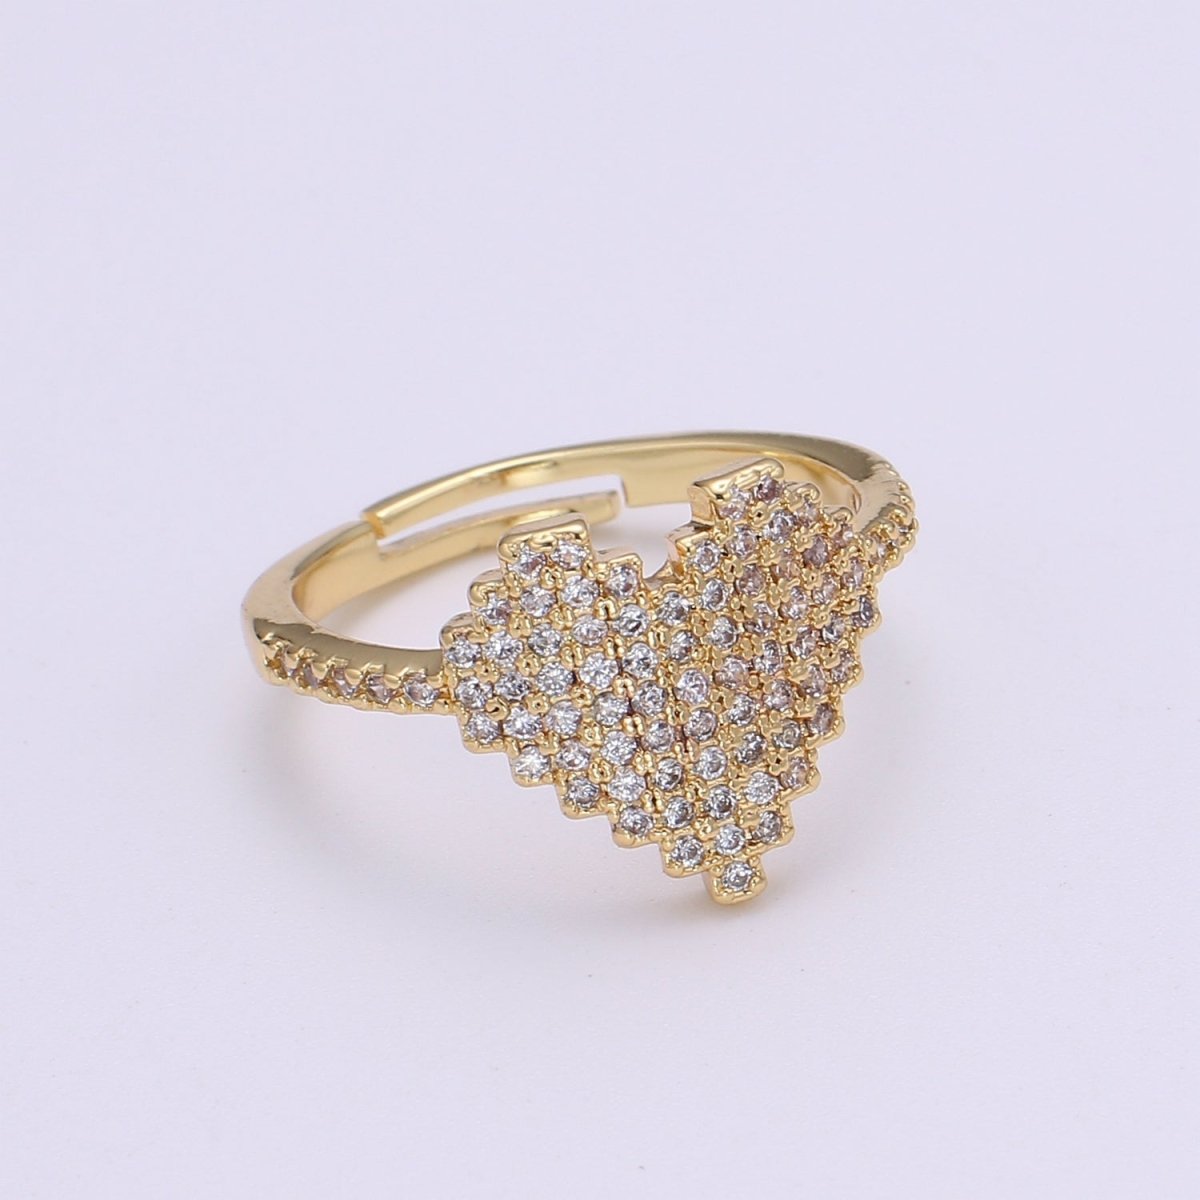 Adjustable 24k Gold Heart Ring, CZ Pave Adjustable Ring for stacking jewelry O-292 - DLUXCA